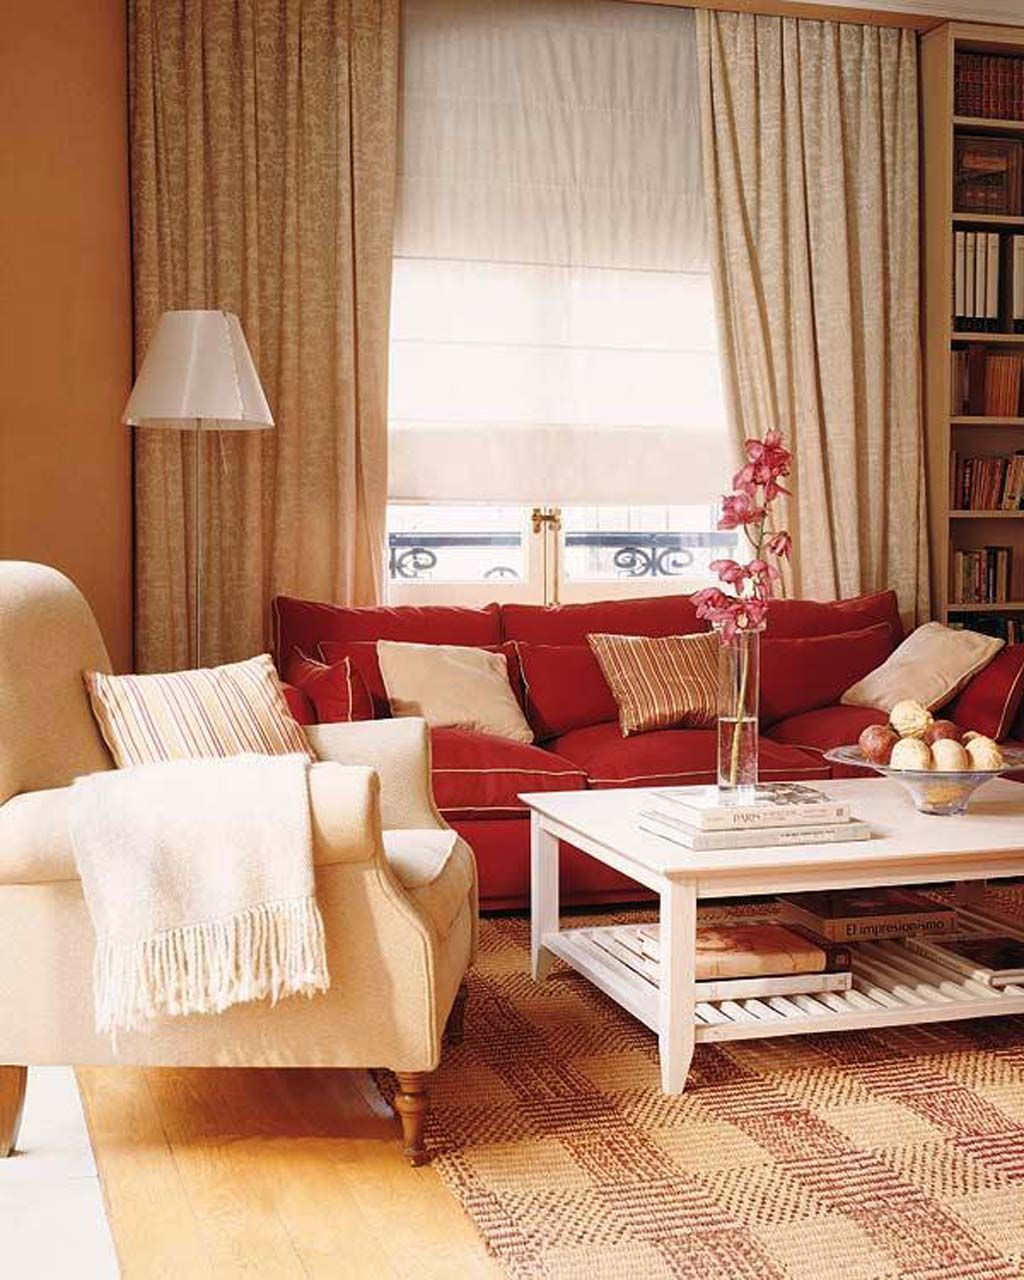 Red Couch Living Room Ideas
 30 Small Living Room Decorating Ideas